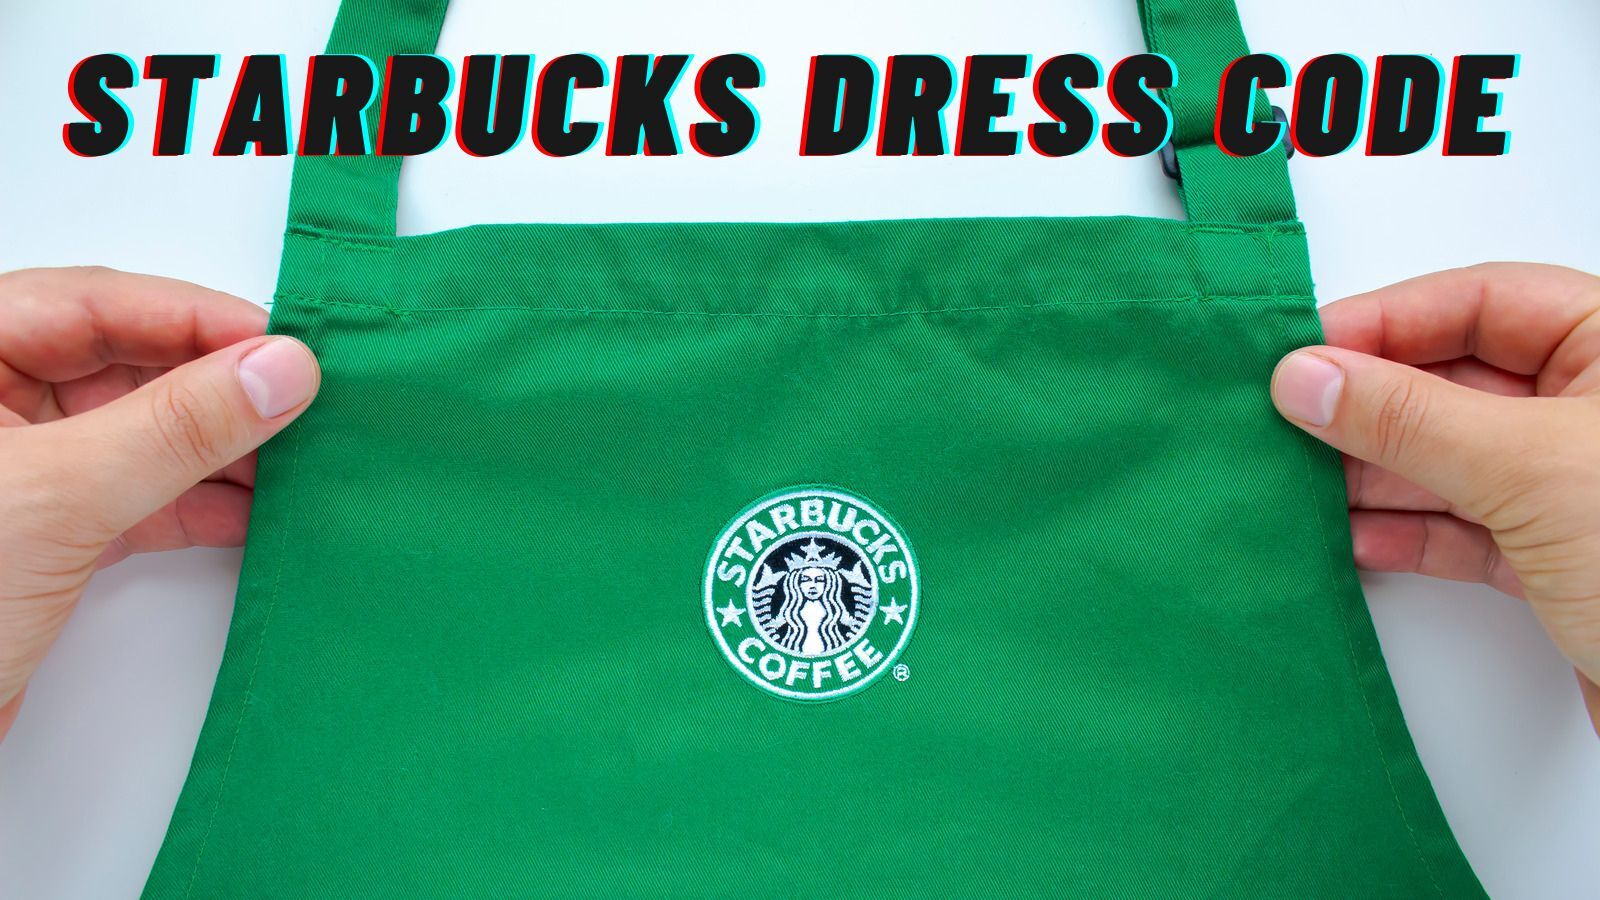 Does Starbucks Have a Dress Code? (Get The Detailed Guide)